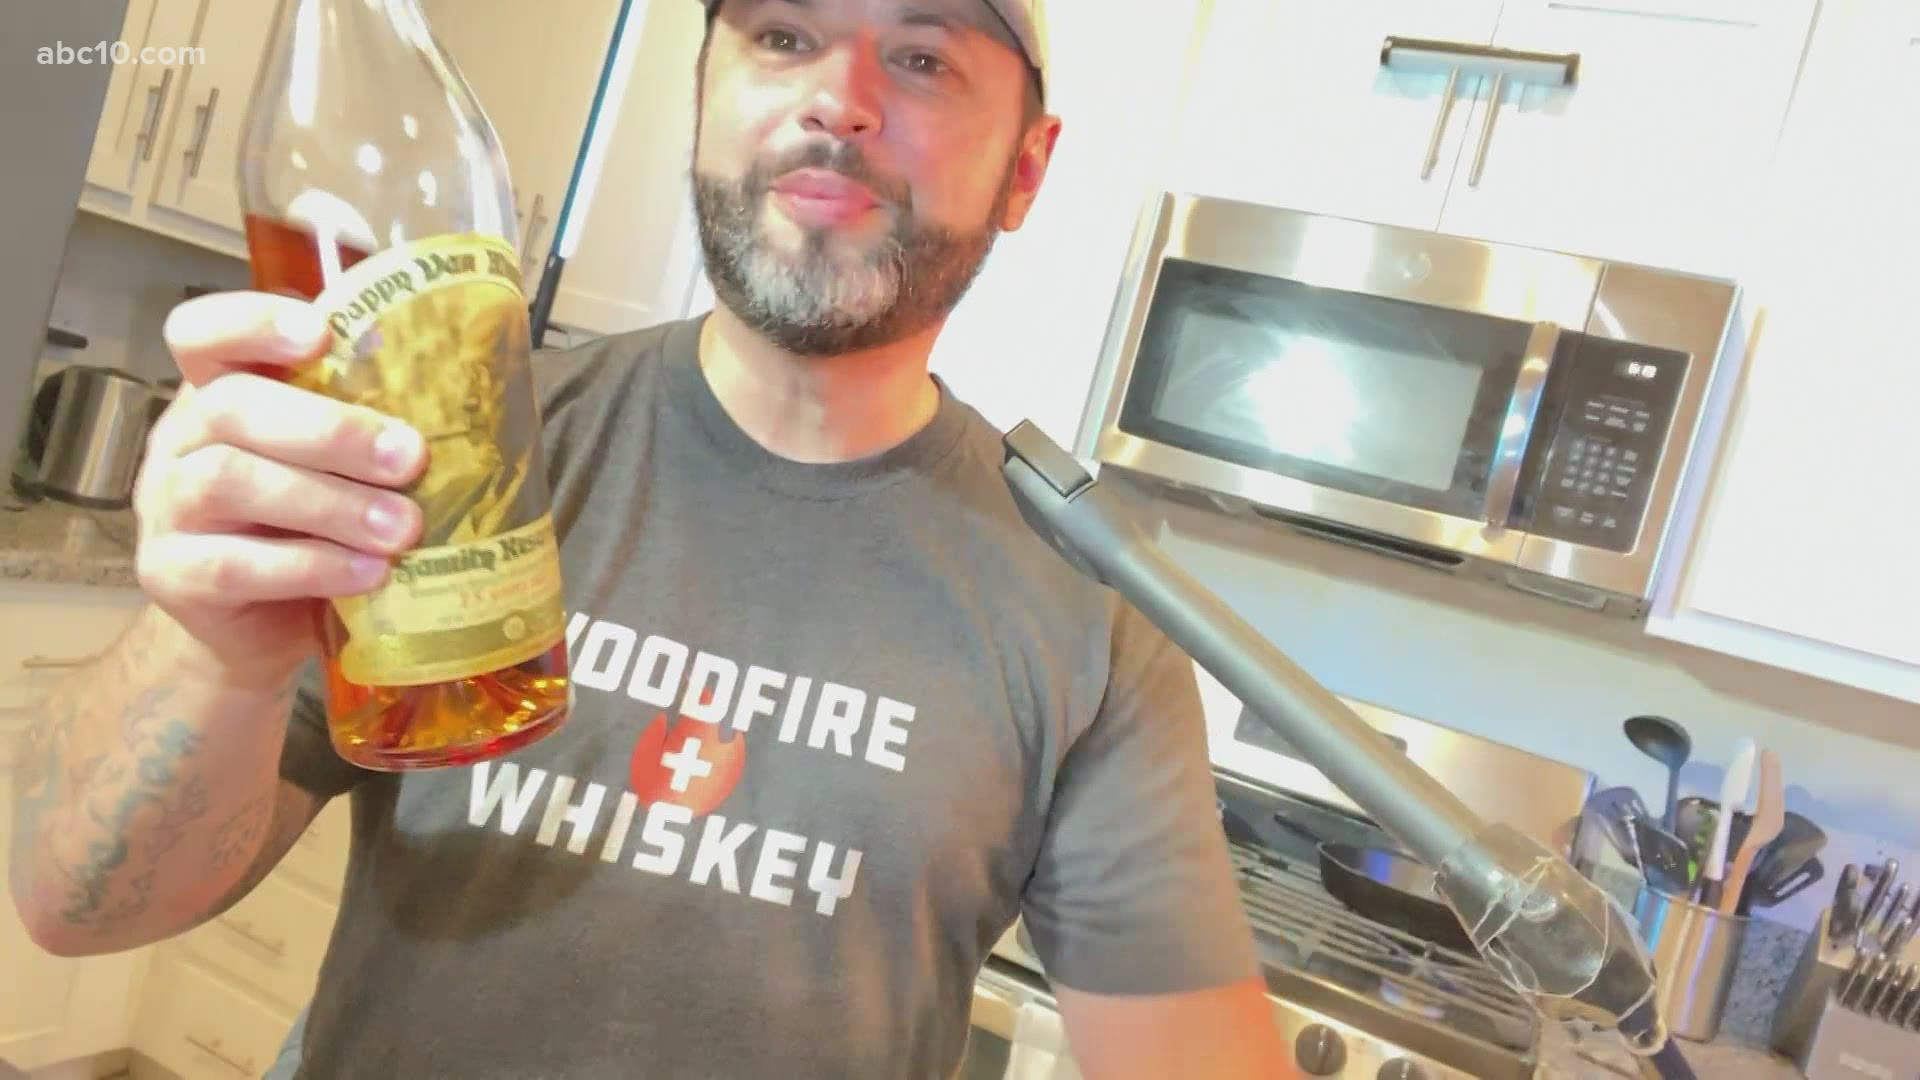 Marco from Turlock is making waves on YouTube and TikTok with his channel dedicated to cooking and whiskeys.